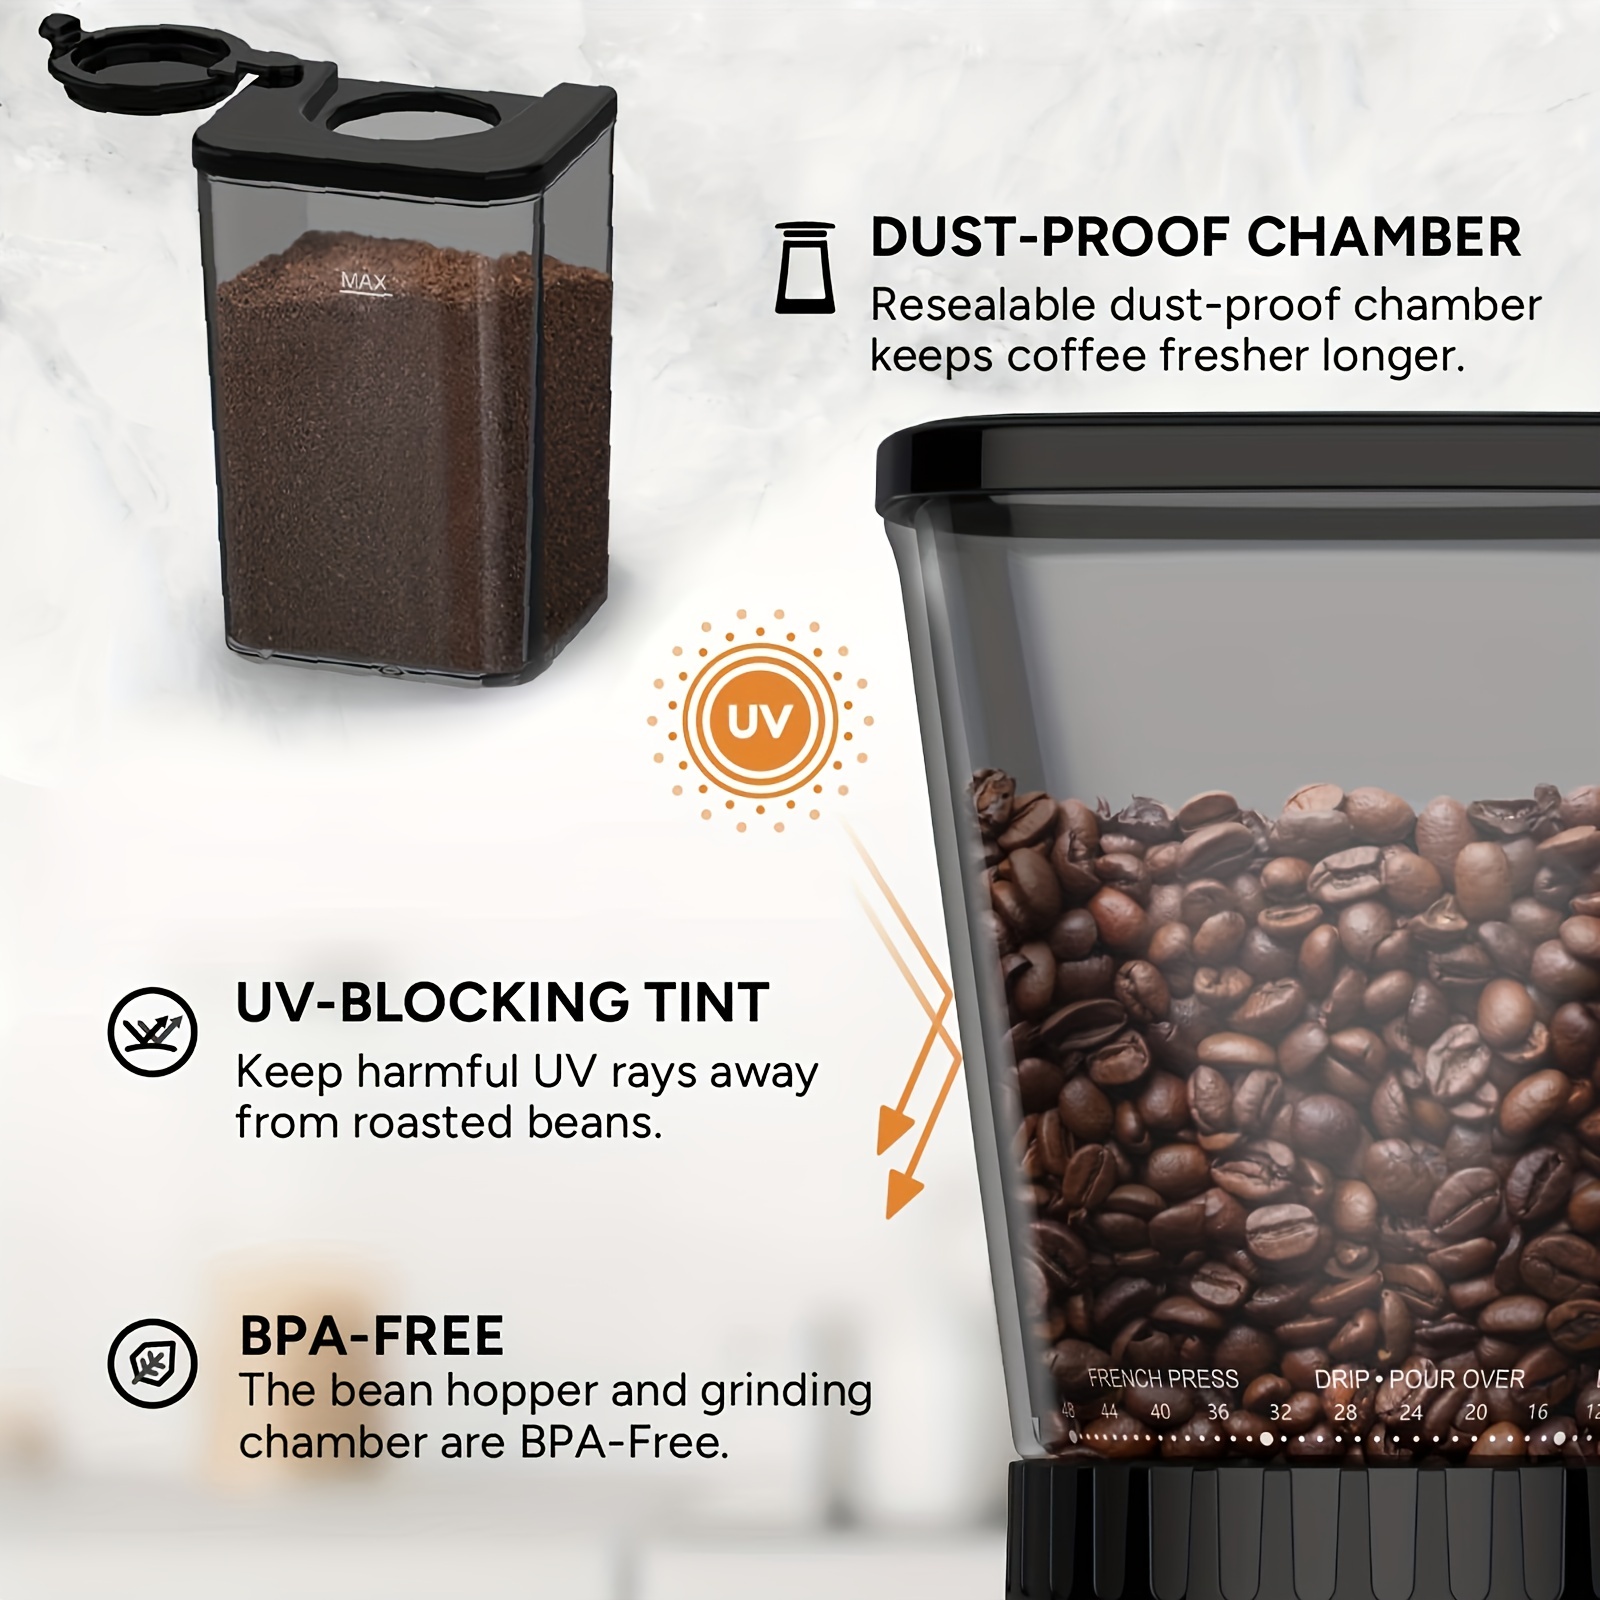 Iagreea Coffee Grinder, With 48 Precise Grinding Settings